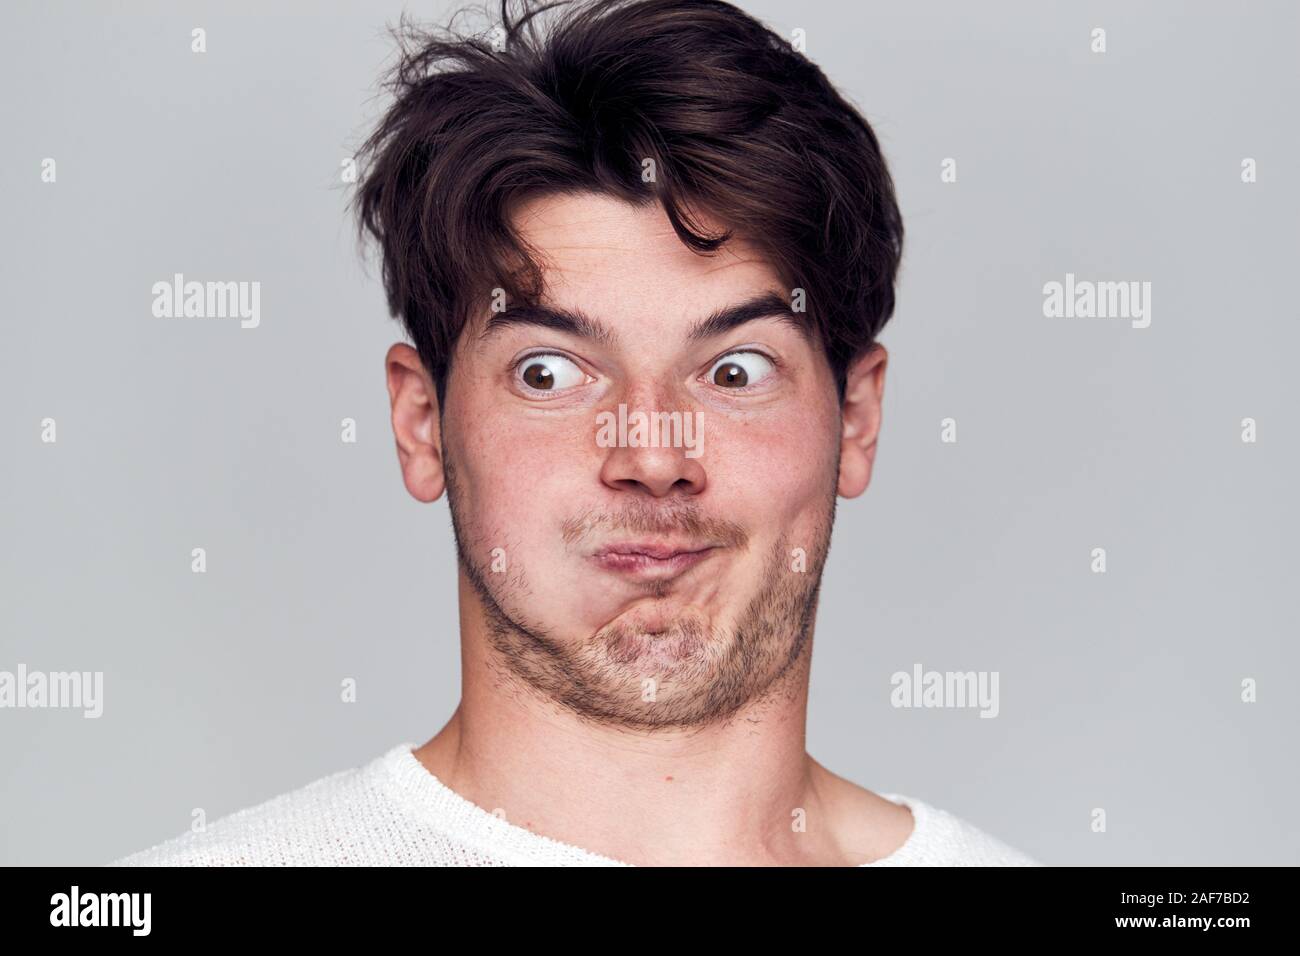 Head And Shoulders Studio Shot Of Man Pulling Faces And Smiling At Camera Stock Photo